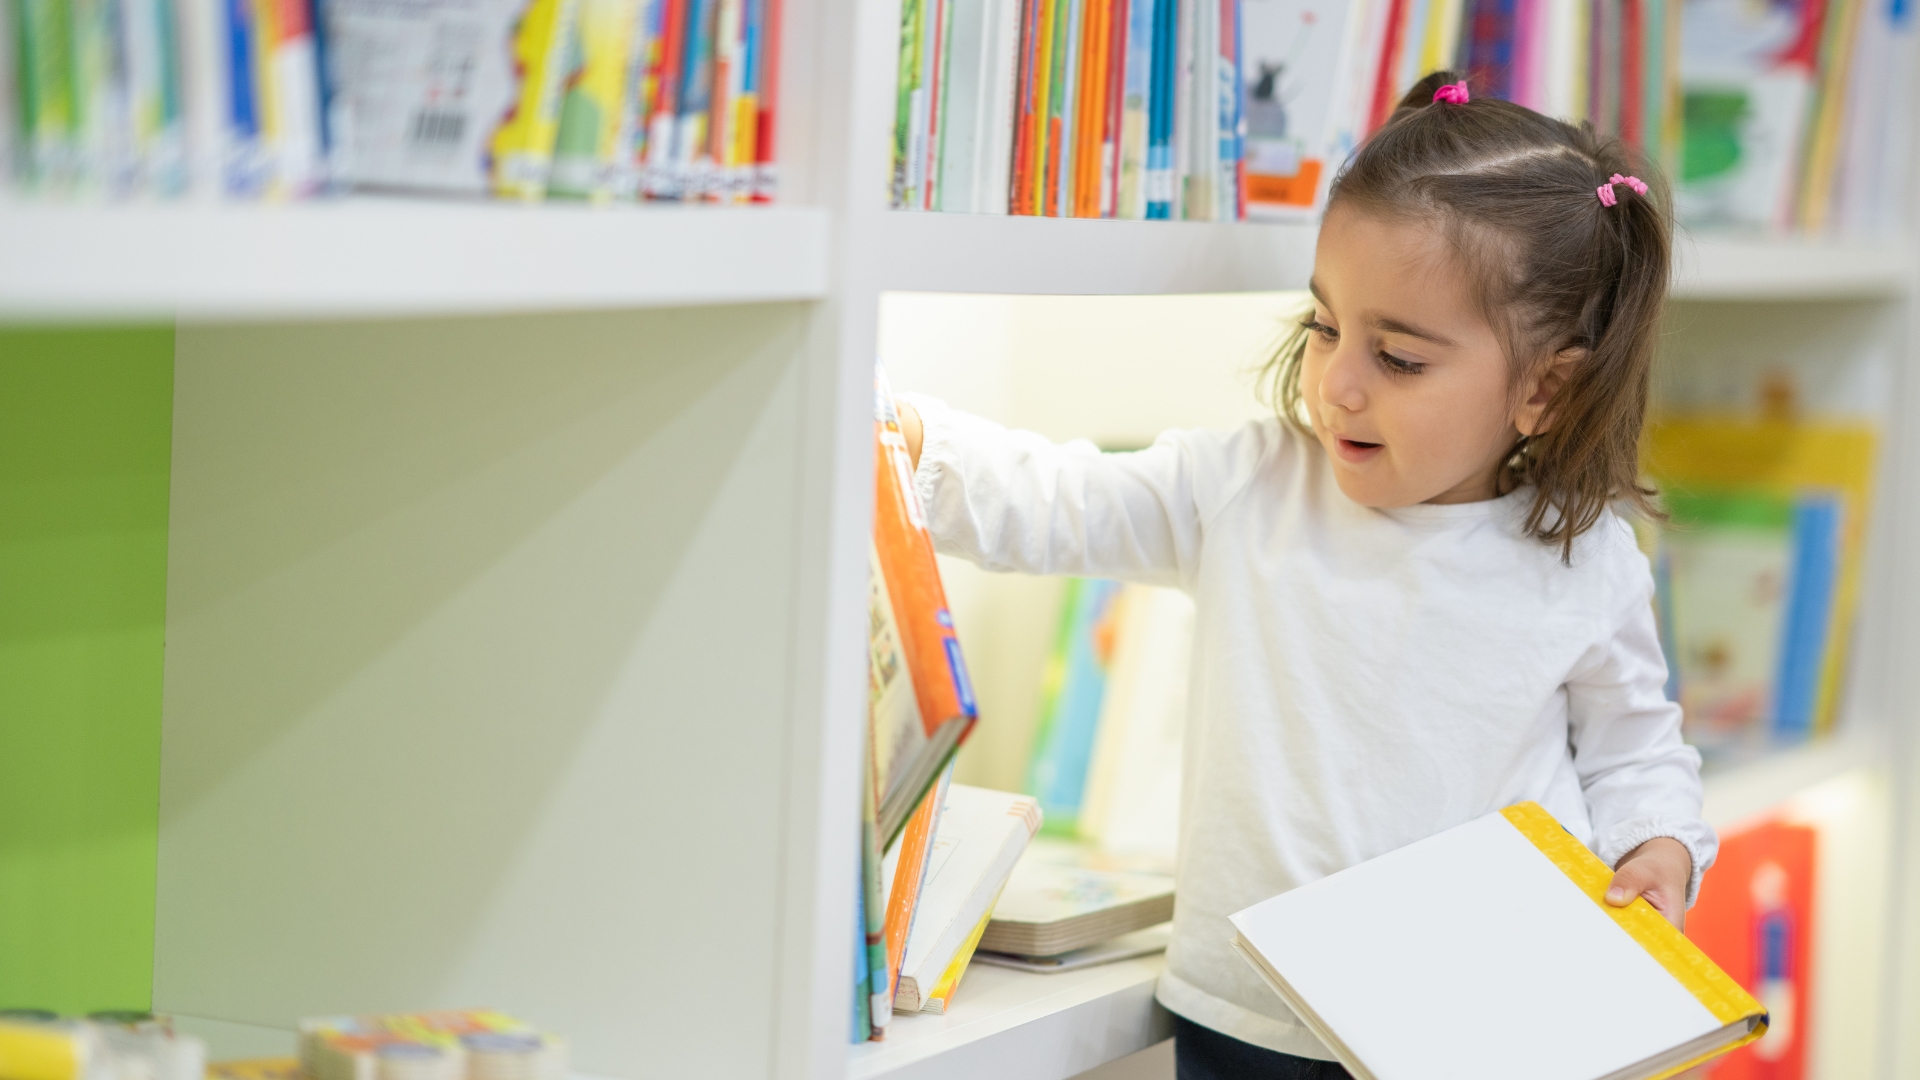 A little girl choosing her own book to read from her shelves via Canva.